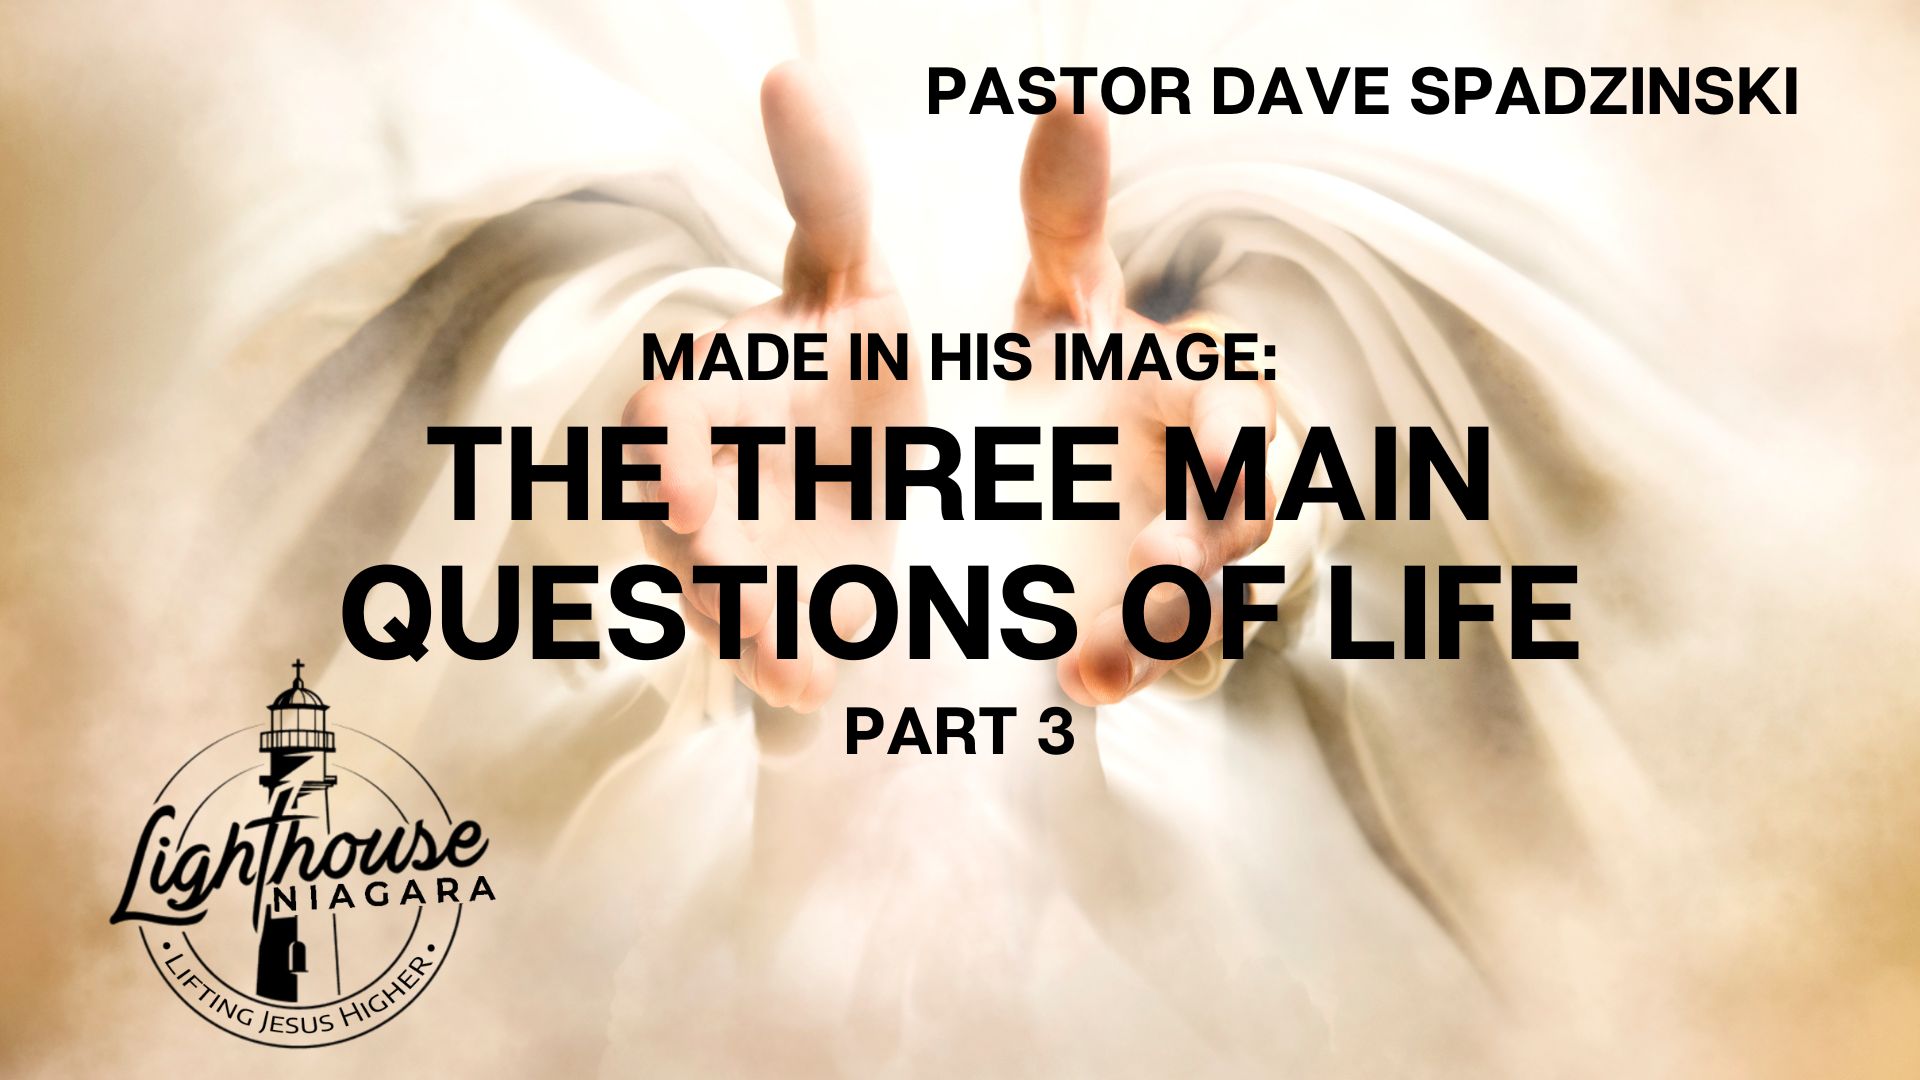 Made In His Image: The Three Main Questions of Life - Pastor Dave Spadzinski